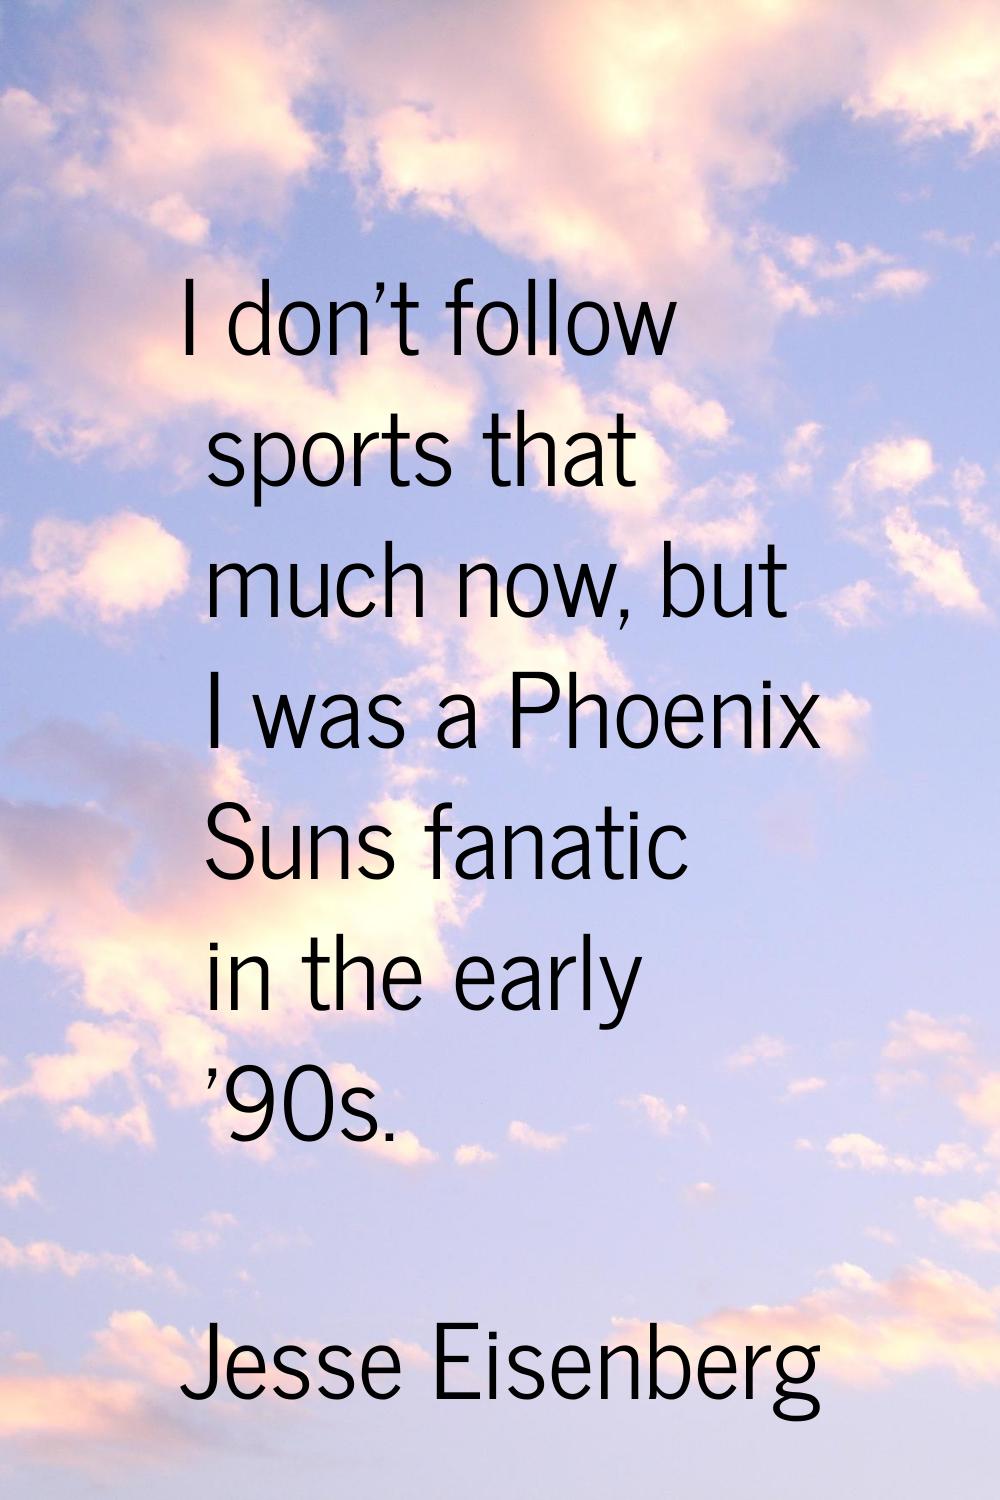 I don't follow sports that much now, but I was a Phoenix Suns fanatic in the early '90s.